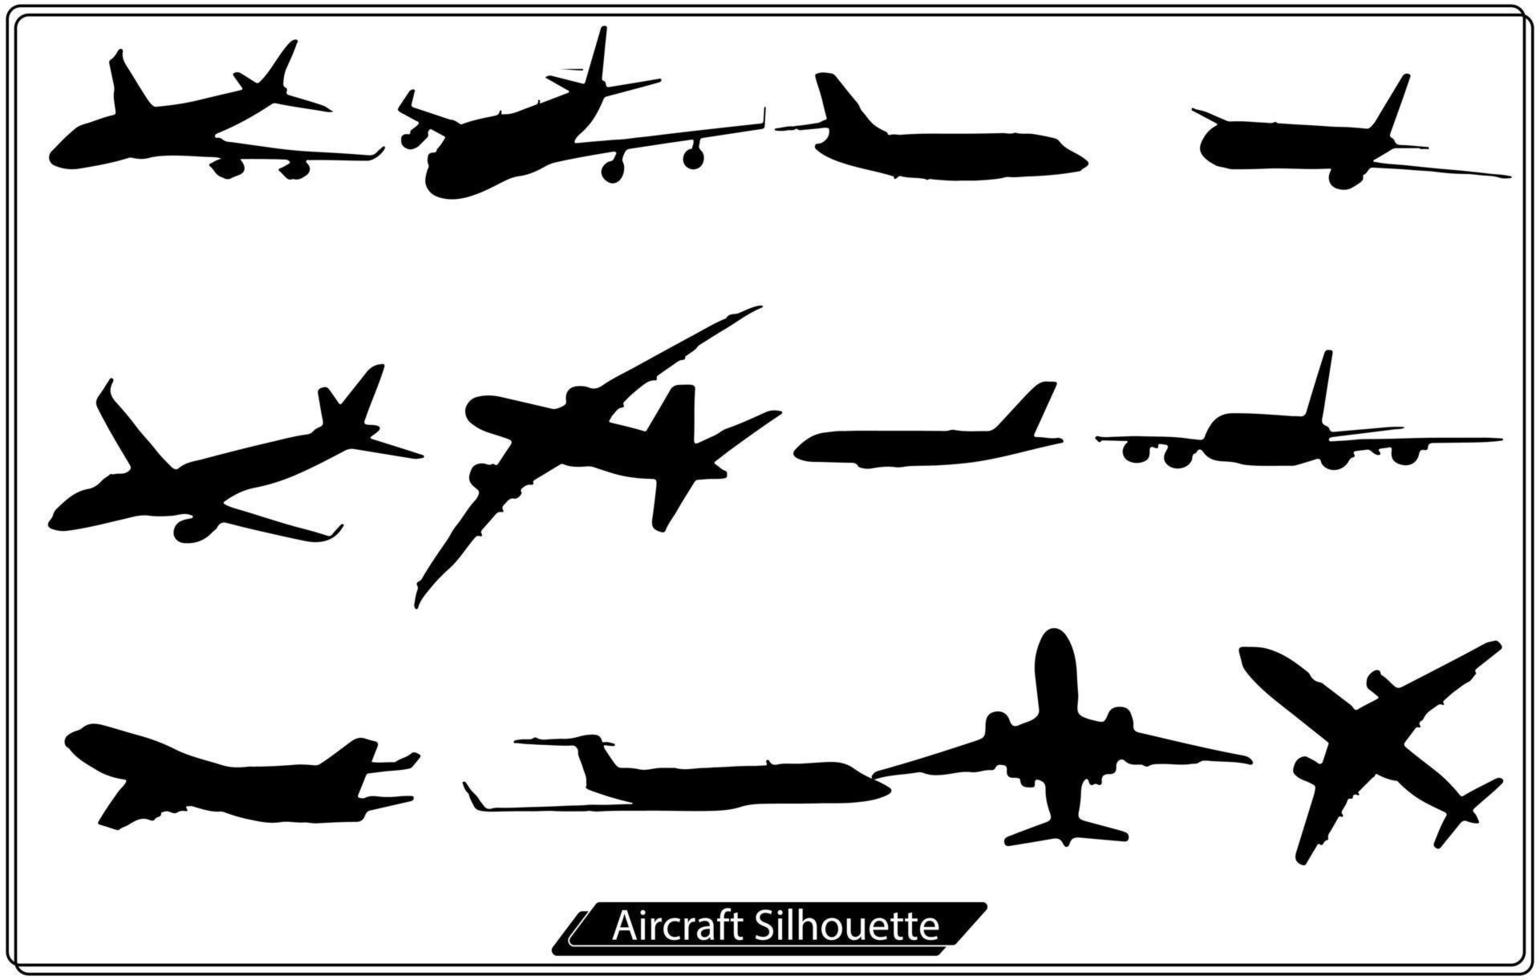 Set of airplanes silhouettes.vector illustration of aircrafts vector